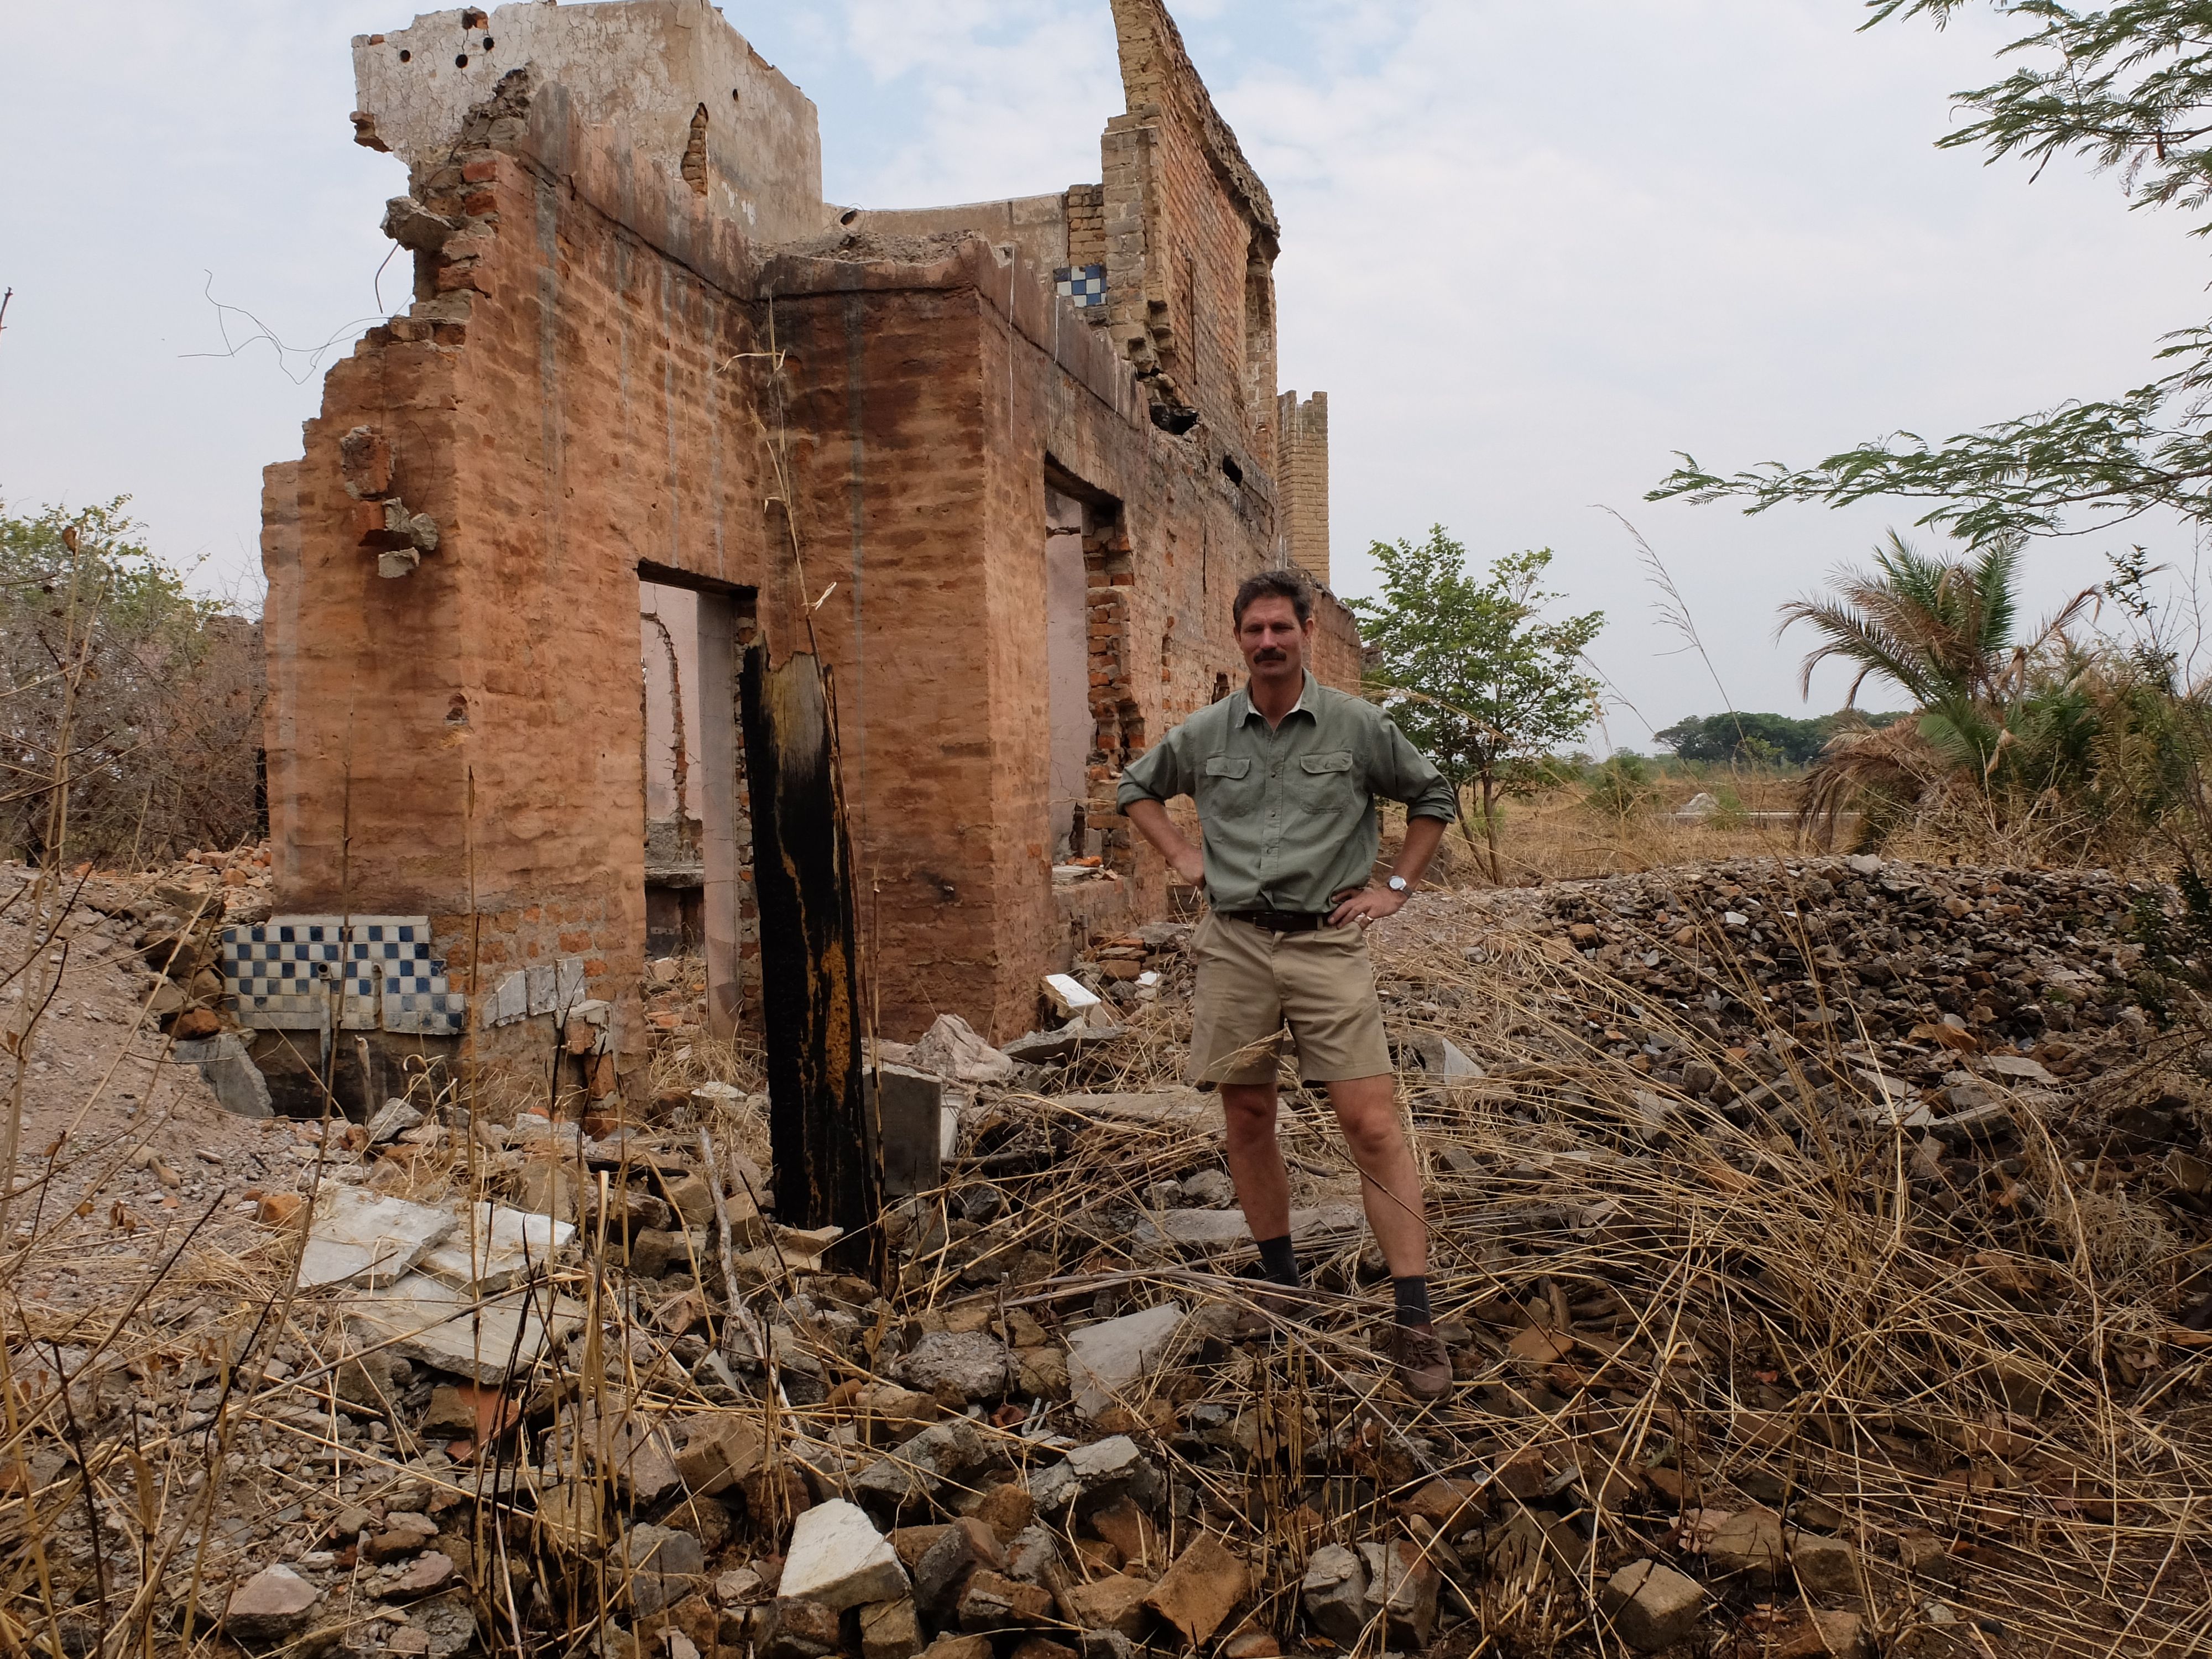 Ben Freeth returns to the ruins of his home, which was burned down in 2009. Image by Martin Fletcher. Zimbabwe, 2017.